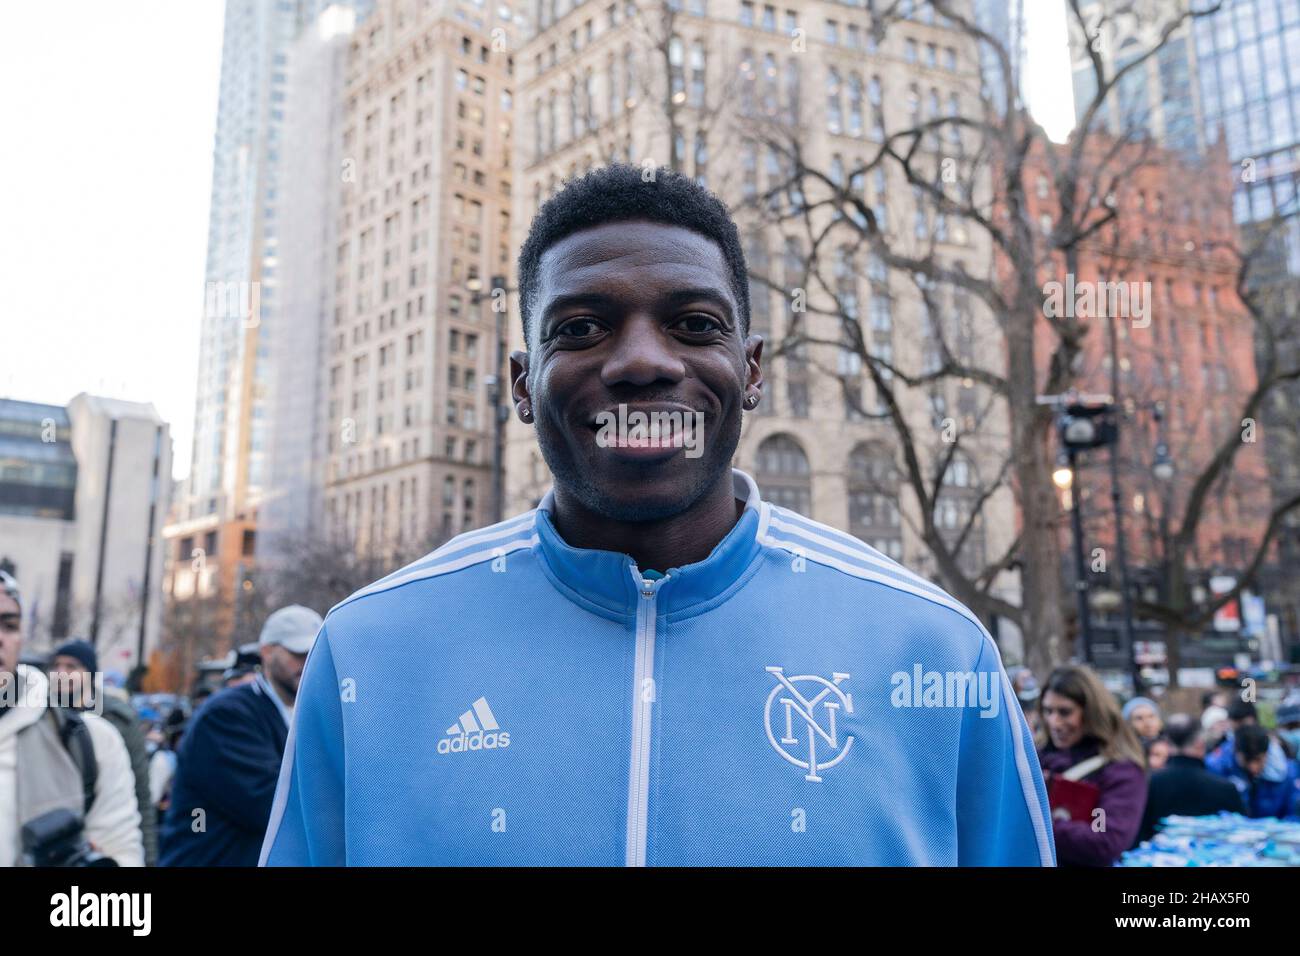 New York, New York, USA. 14th Dec, 2021. Goalkeeper Sean Johnson poses during celebration for NYCFC winning the 2021 MLS Cup on City Hall steps. NYCFC finished the regular season in 4th place and played almost all playoff games away. Winning the MLS Cup is the first trophy won by the franchise since it was established 7 years ago. NYCFC is part of the City Football Group which owns football clubs around the world. Sean Johnson was named MVP of the playofffs. (Credit Image: © Lev Radin/Pacific Press via ZUMA Press Wire) Stock Photo